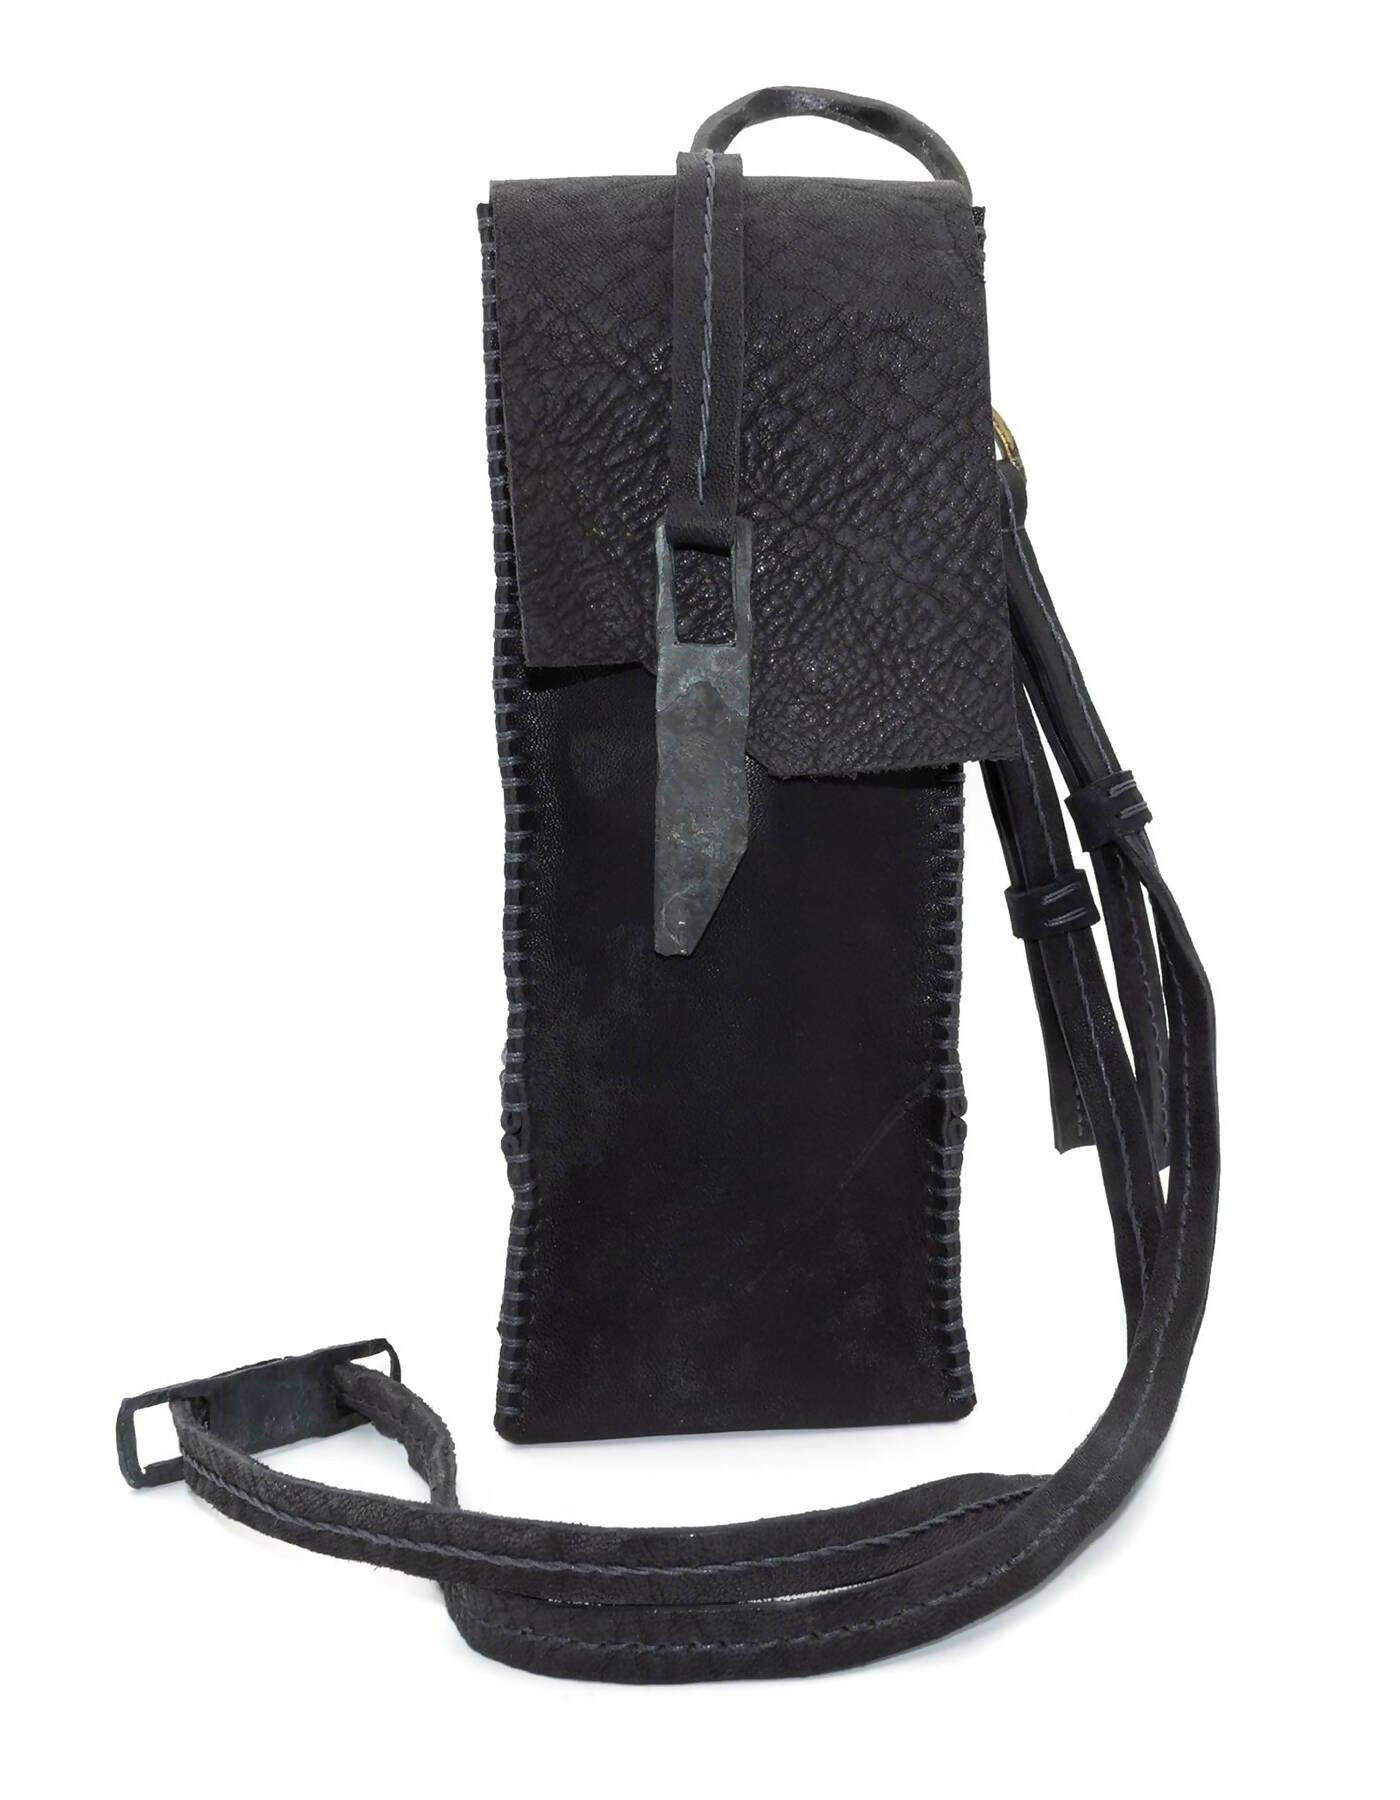 culatta leather phone pouch by ATELIER SKN